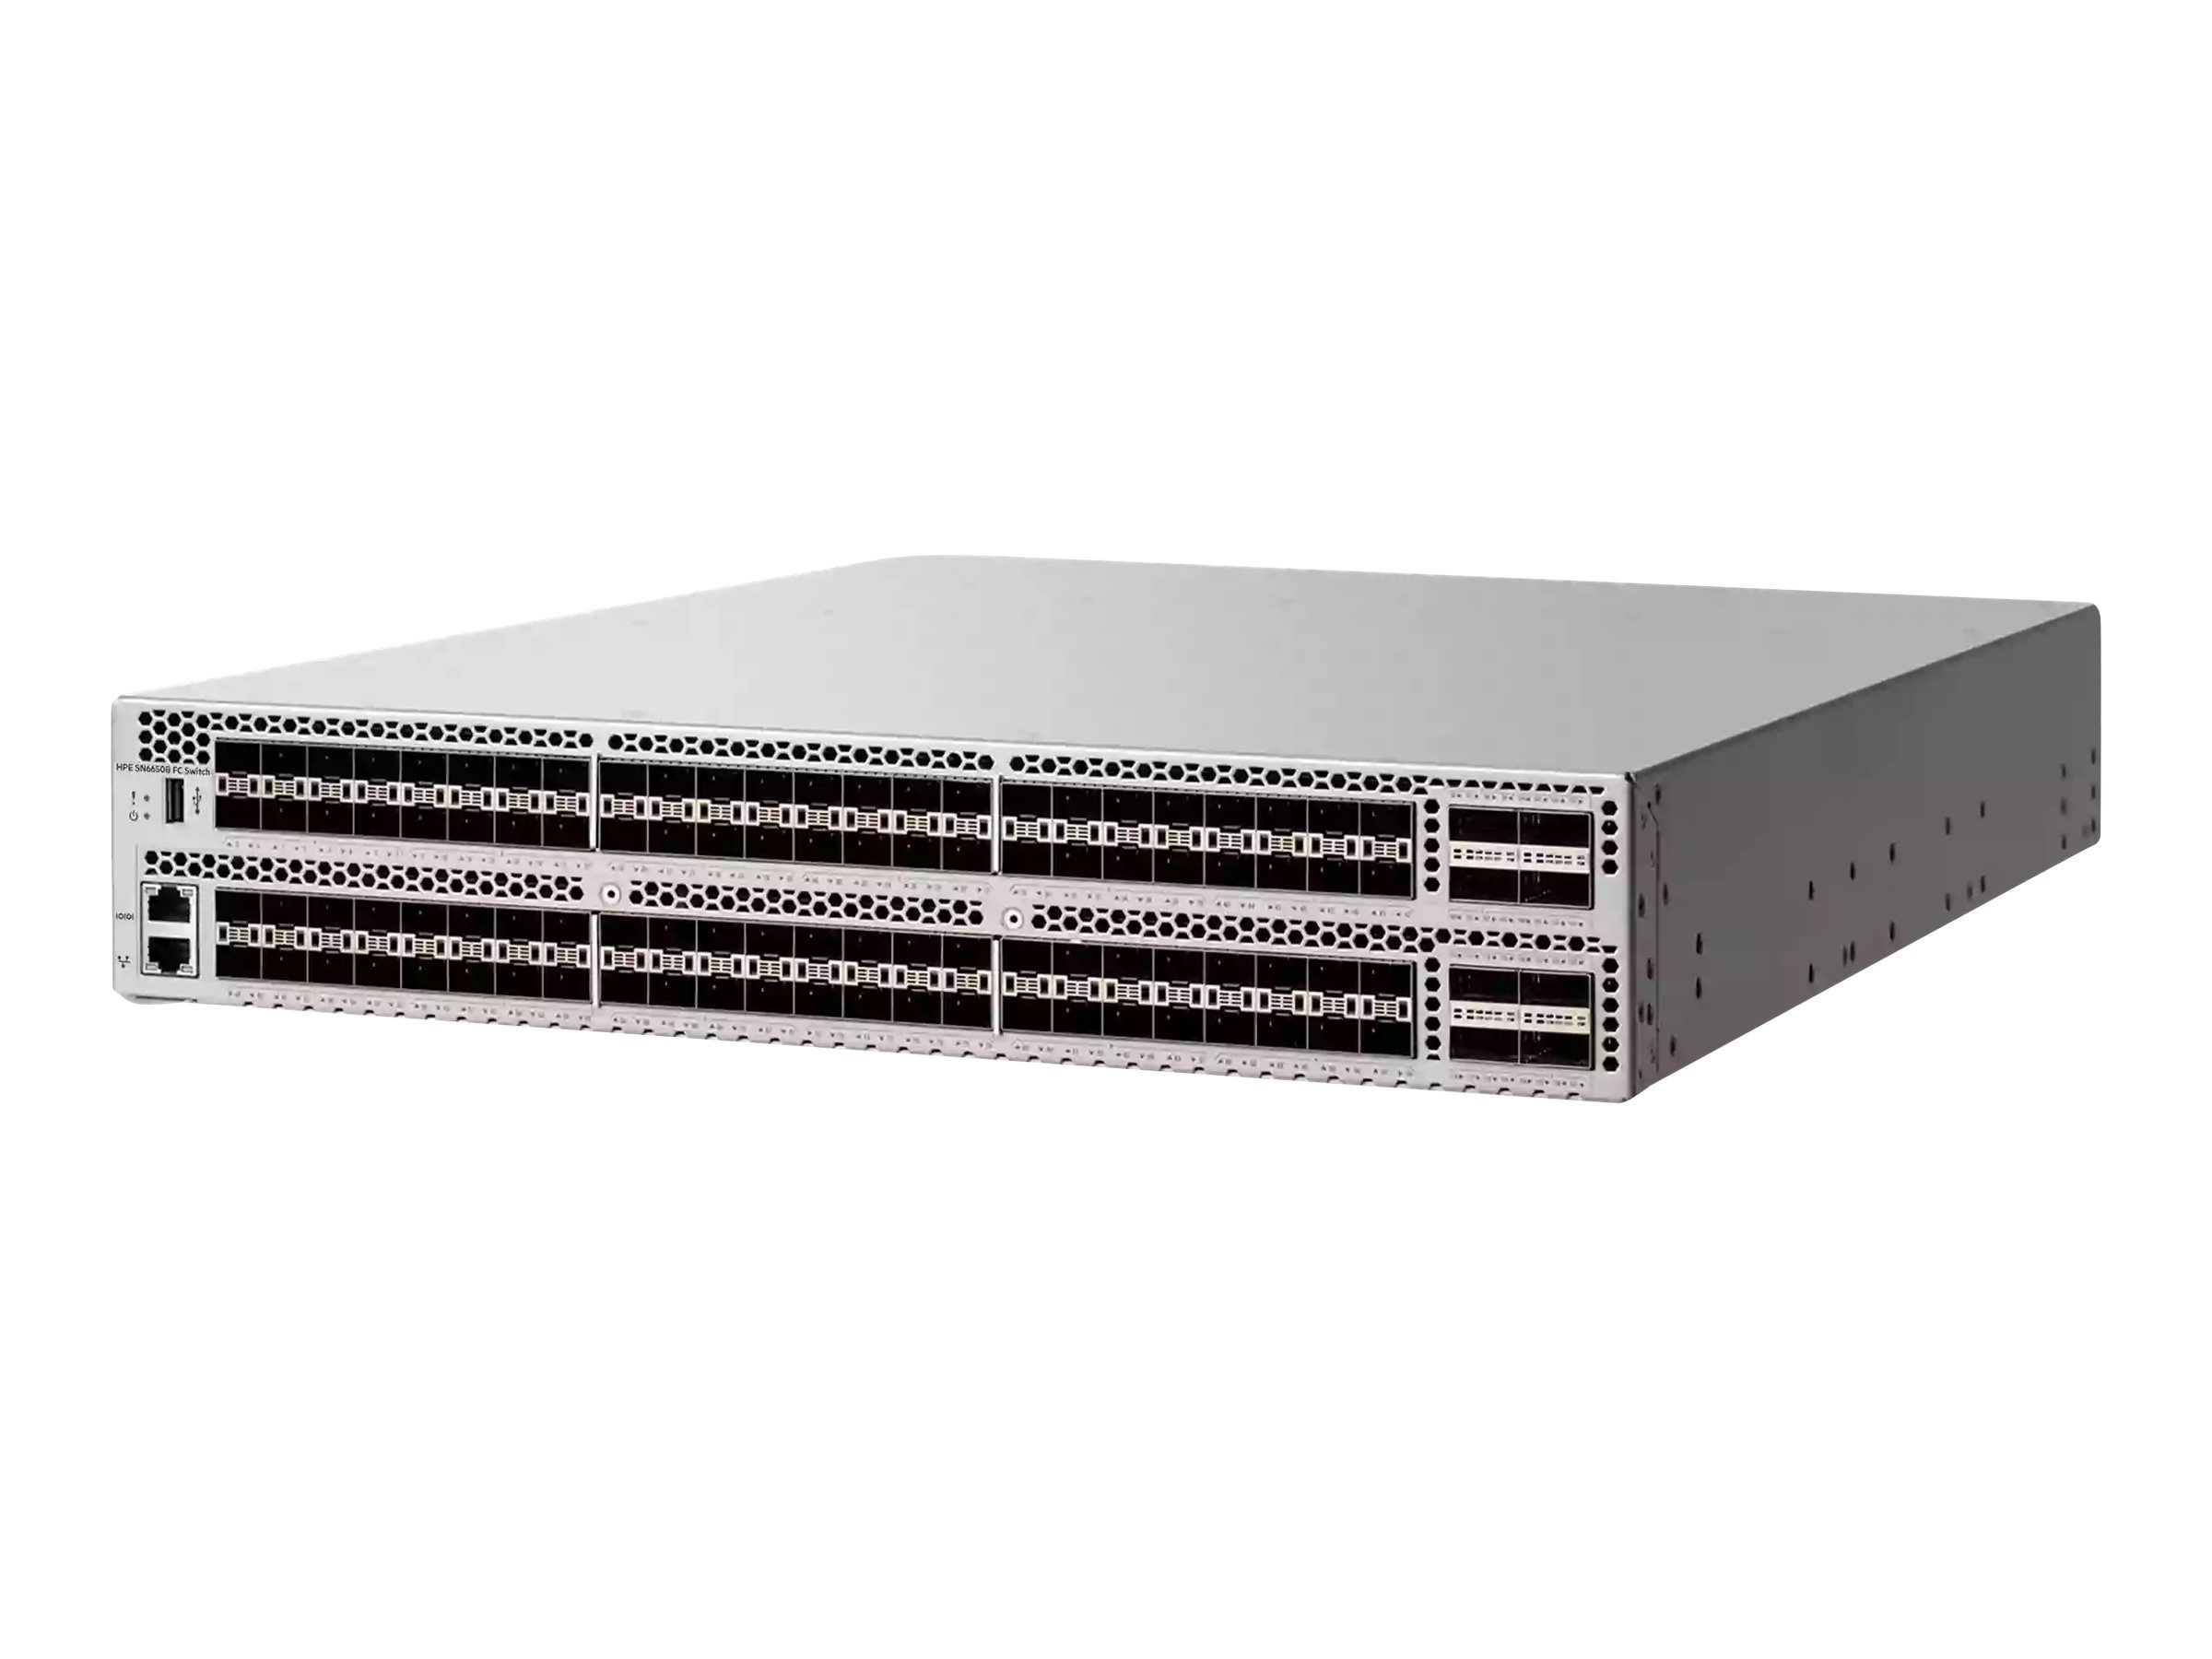 HPE StoreFabric SN6650B Power Pack+ - Switch - managed - 96 x 32Gb Fibre Channel SFP+ - an Rack montierbar - mit 96 x 32Gb Fibre